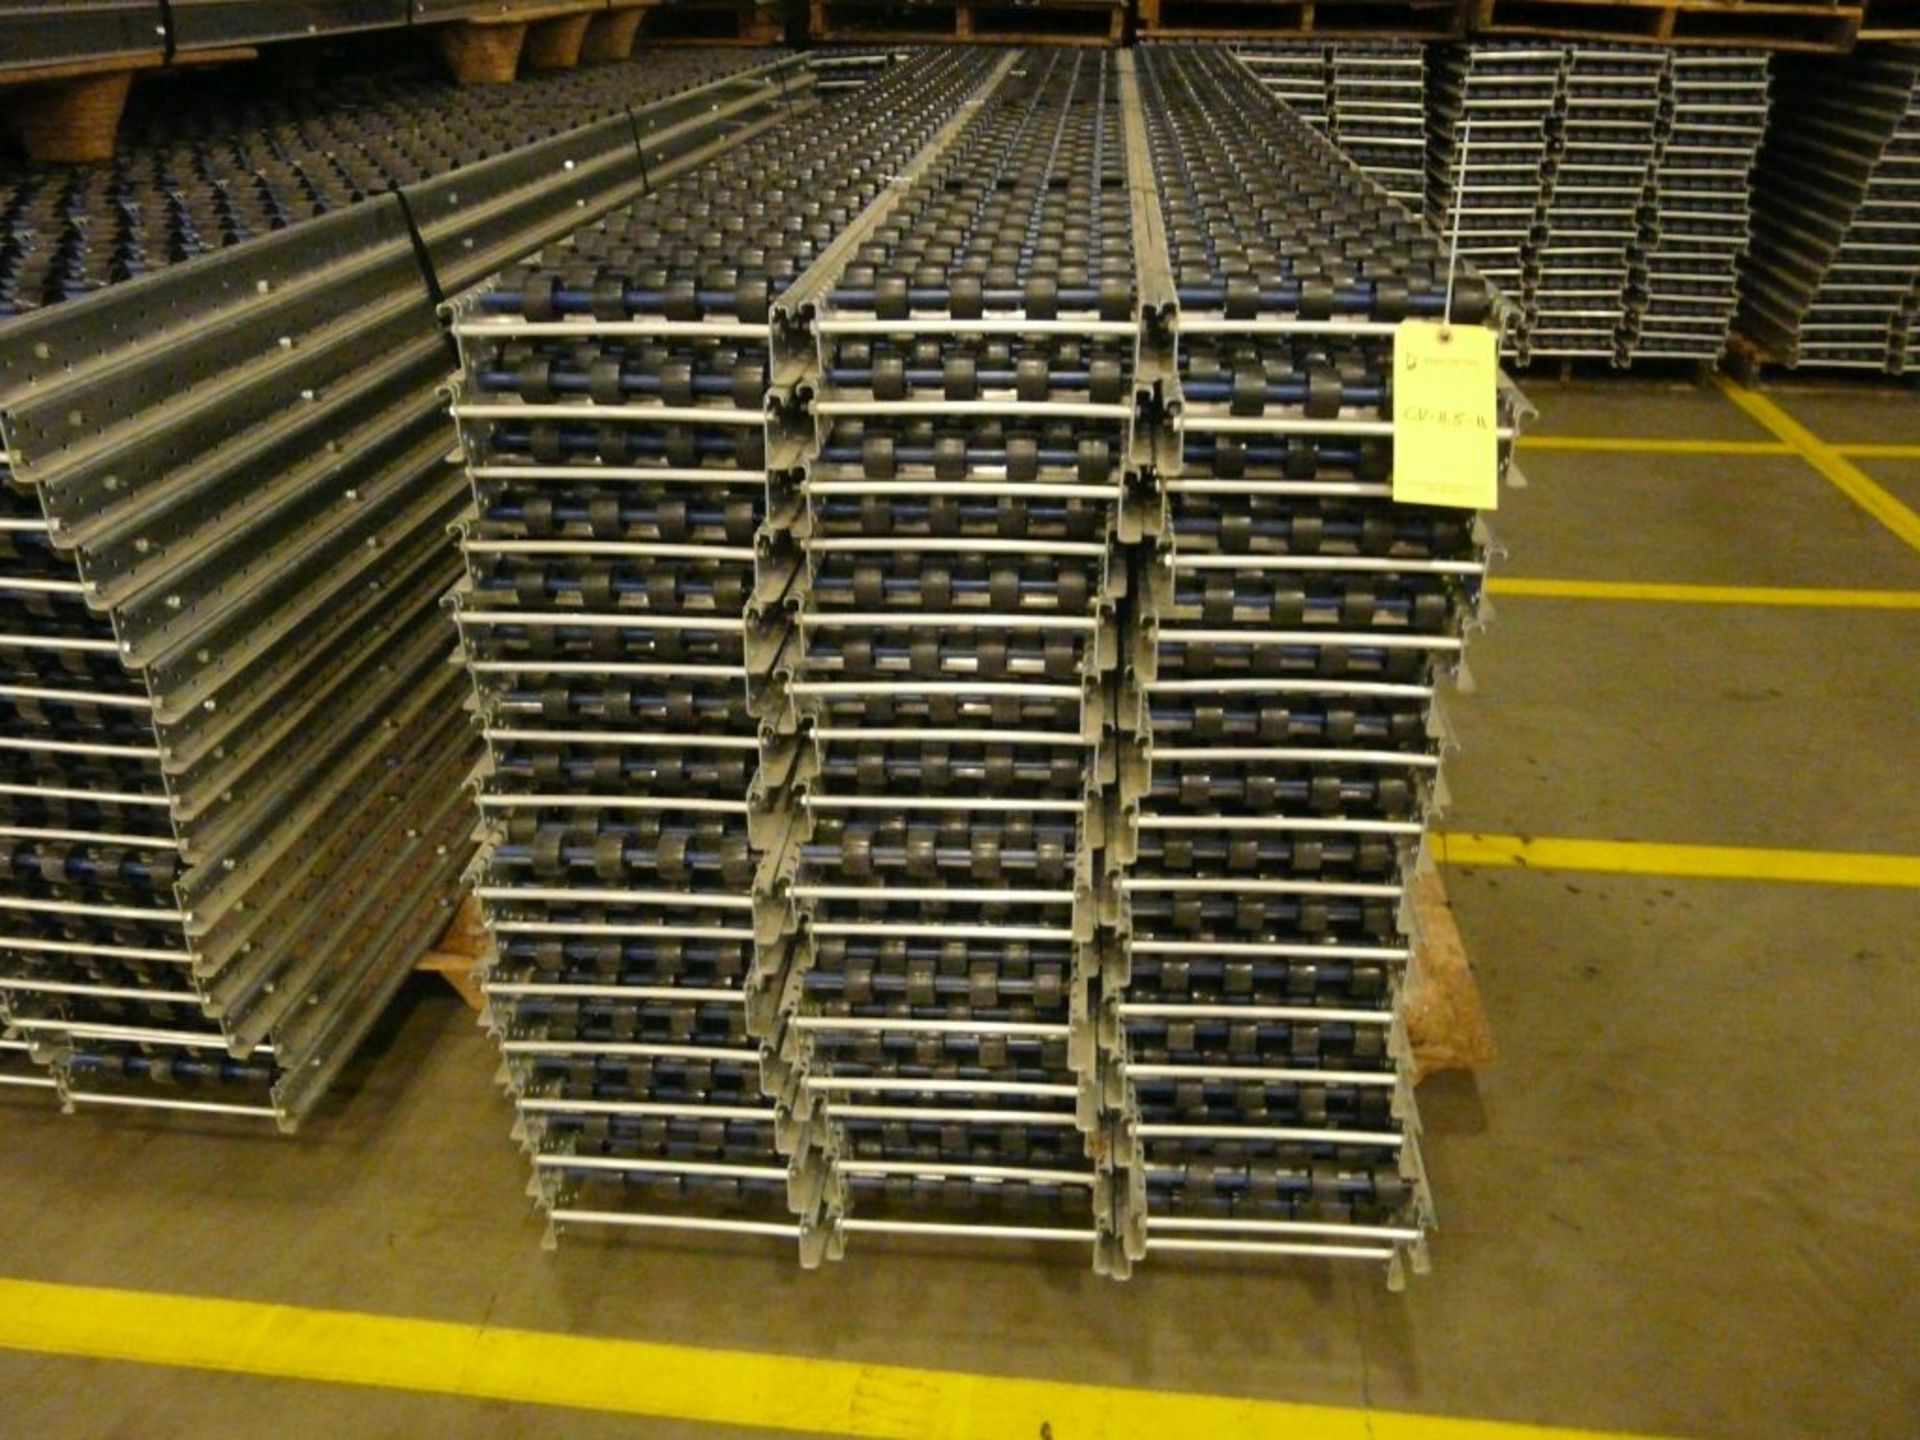 Lot of (90) SpanTrack Wheelbed Carton Flow Conveyors - 11.5'L x 11"W; Tag: 223572 - $30 Lot - Image 2 of 4